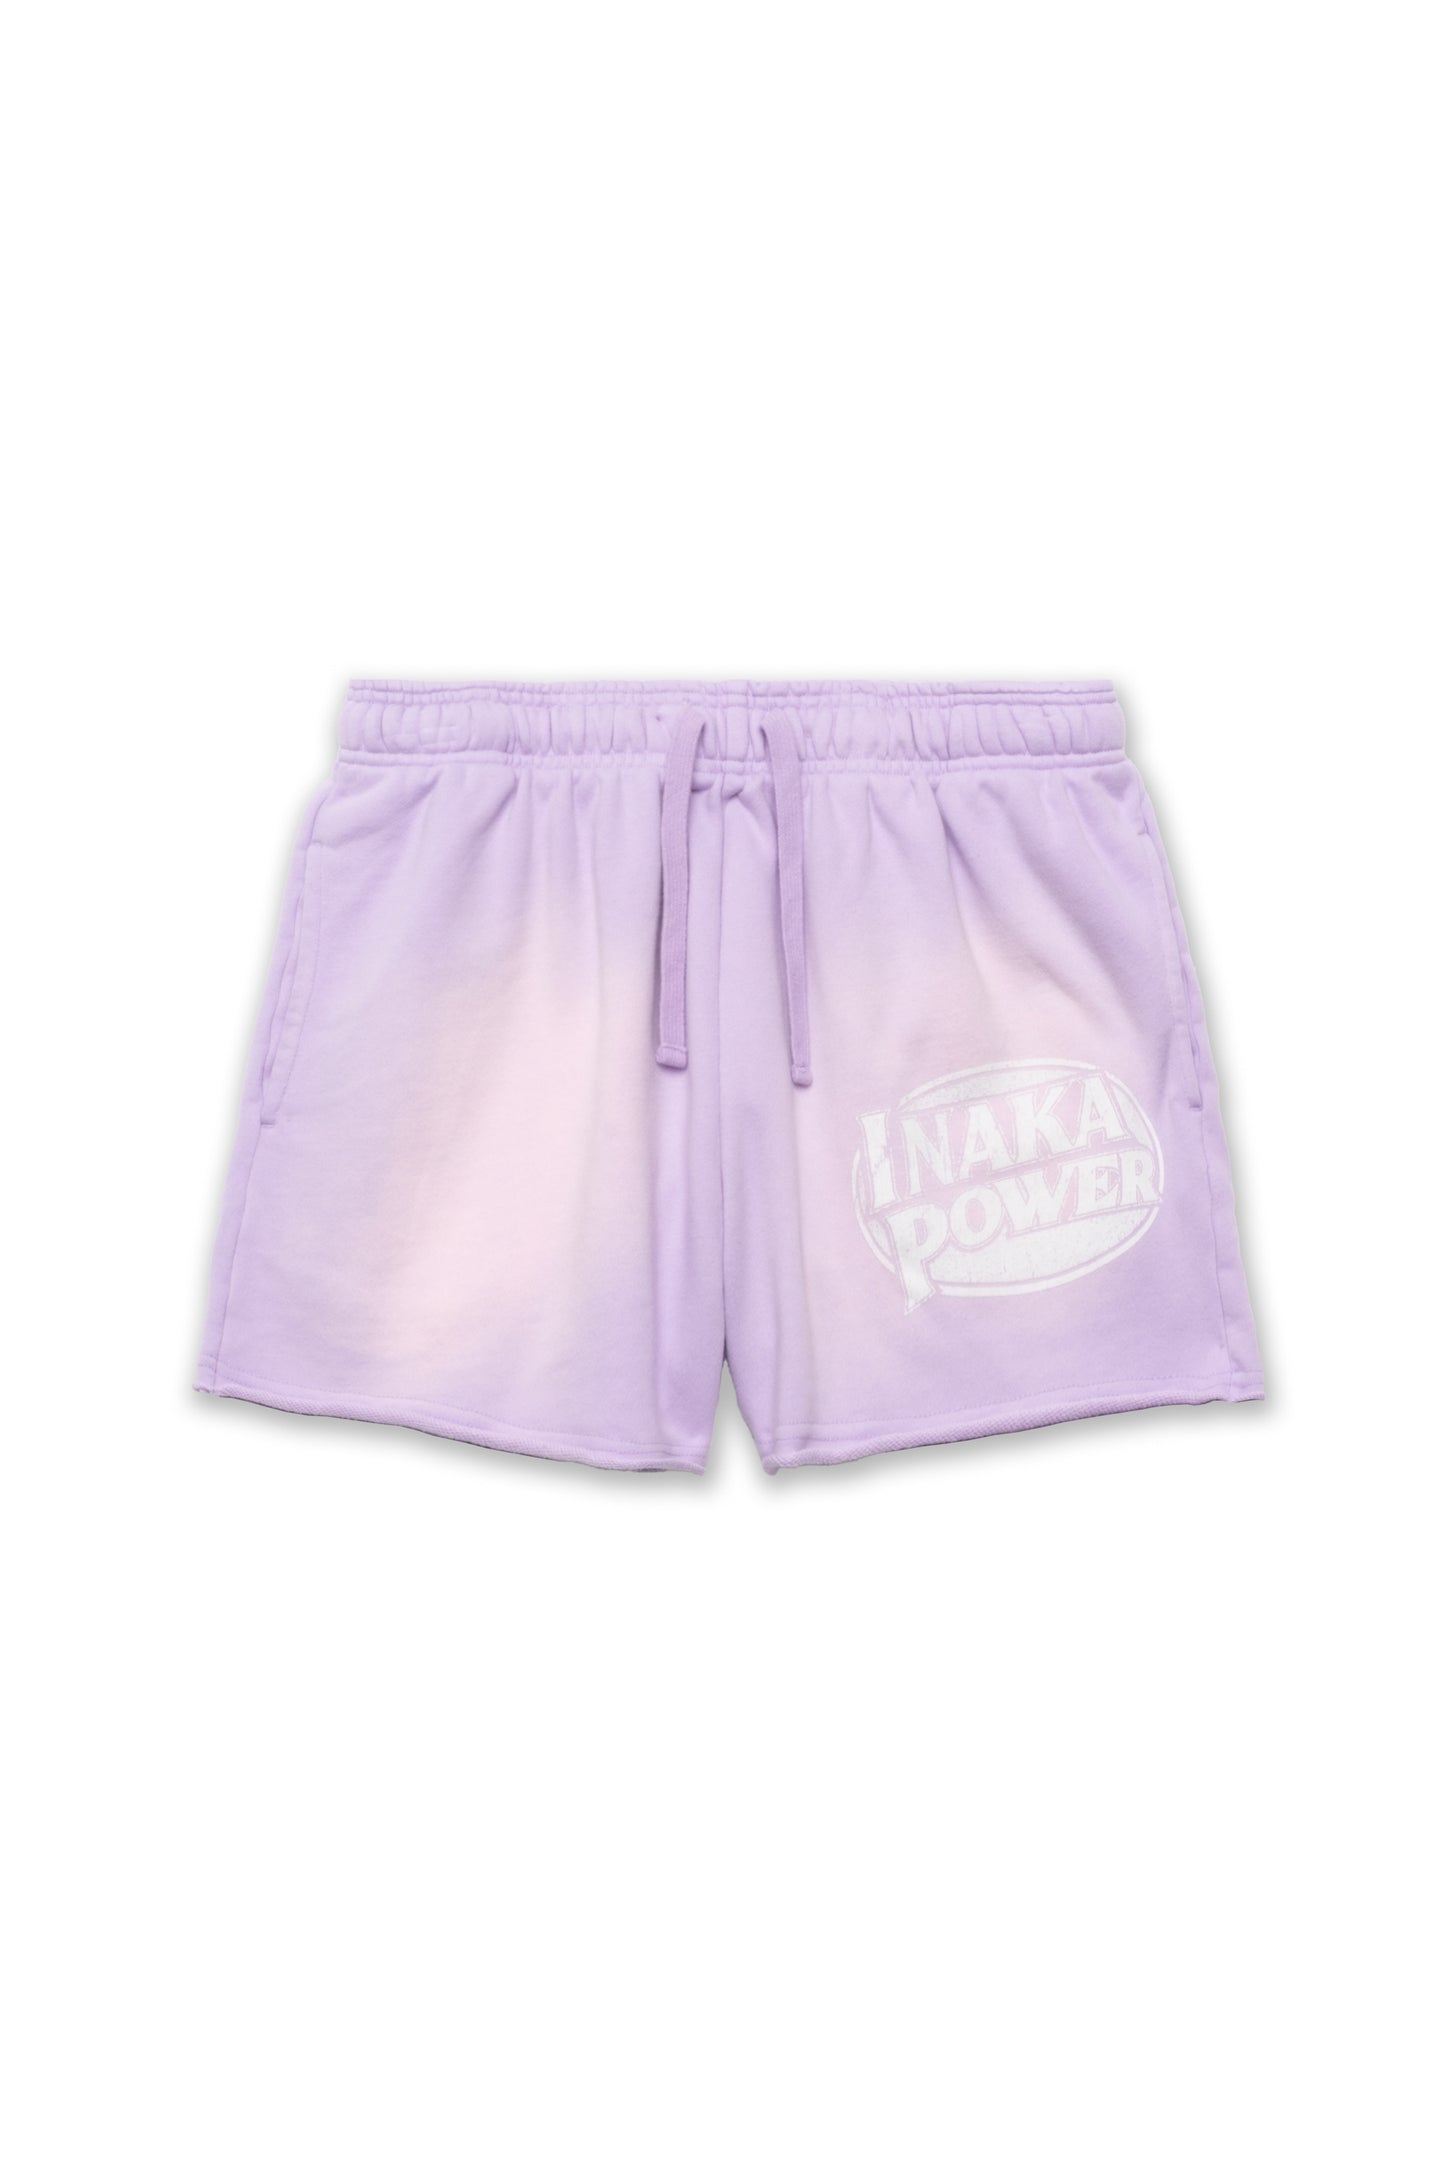 WOMENS SHORTS - PITSTOP LILAC